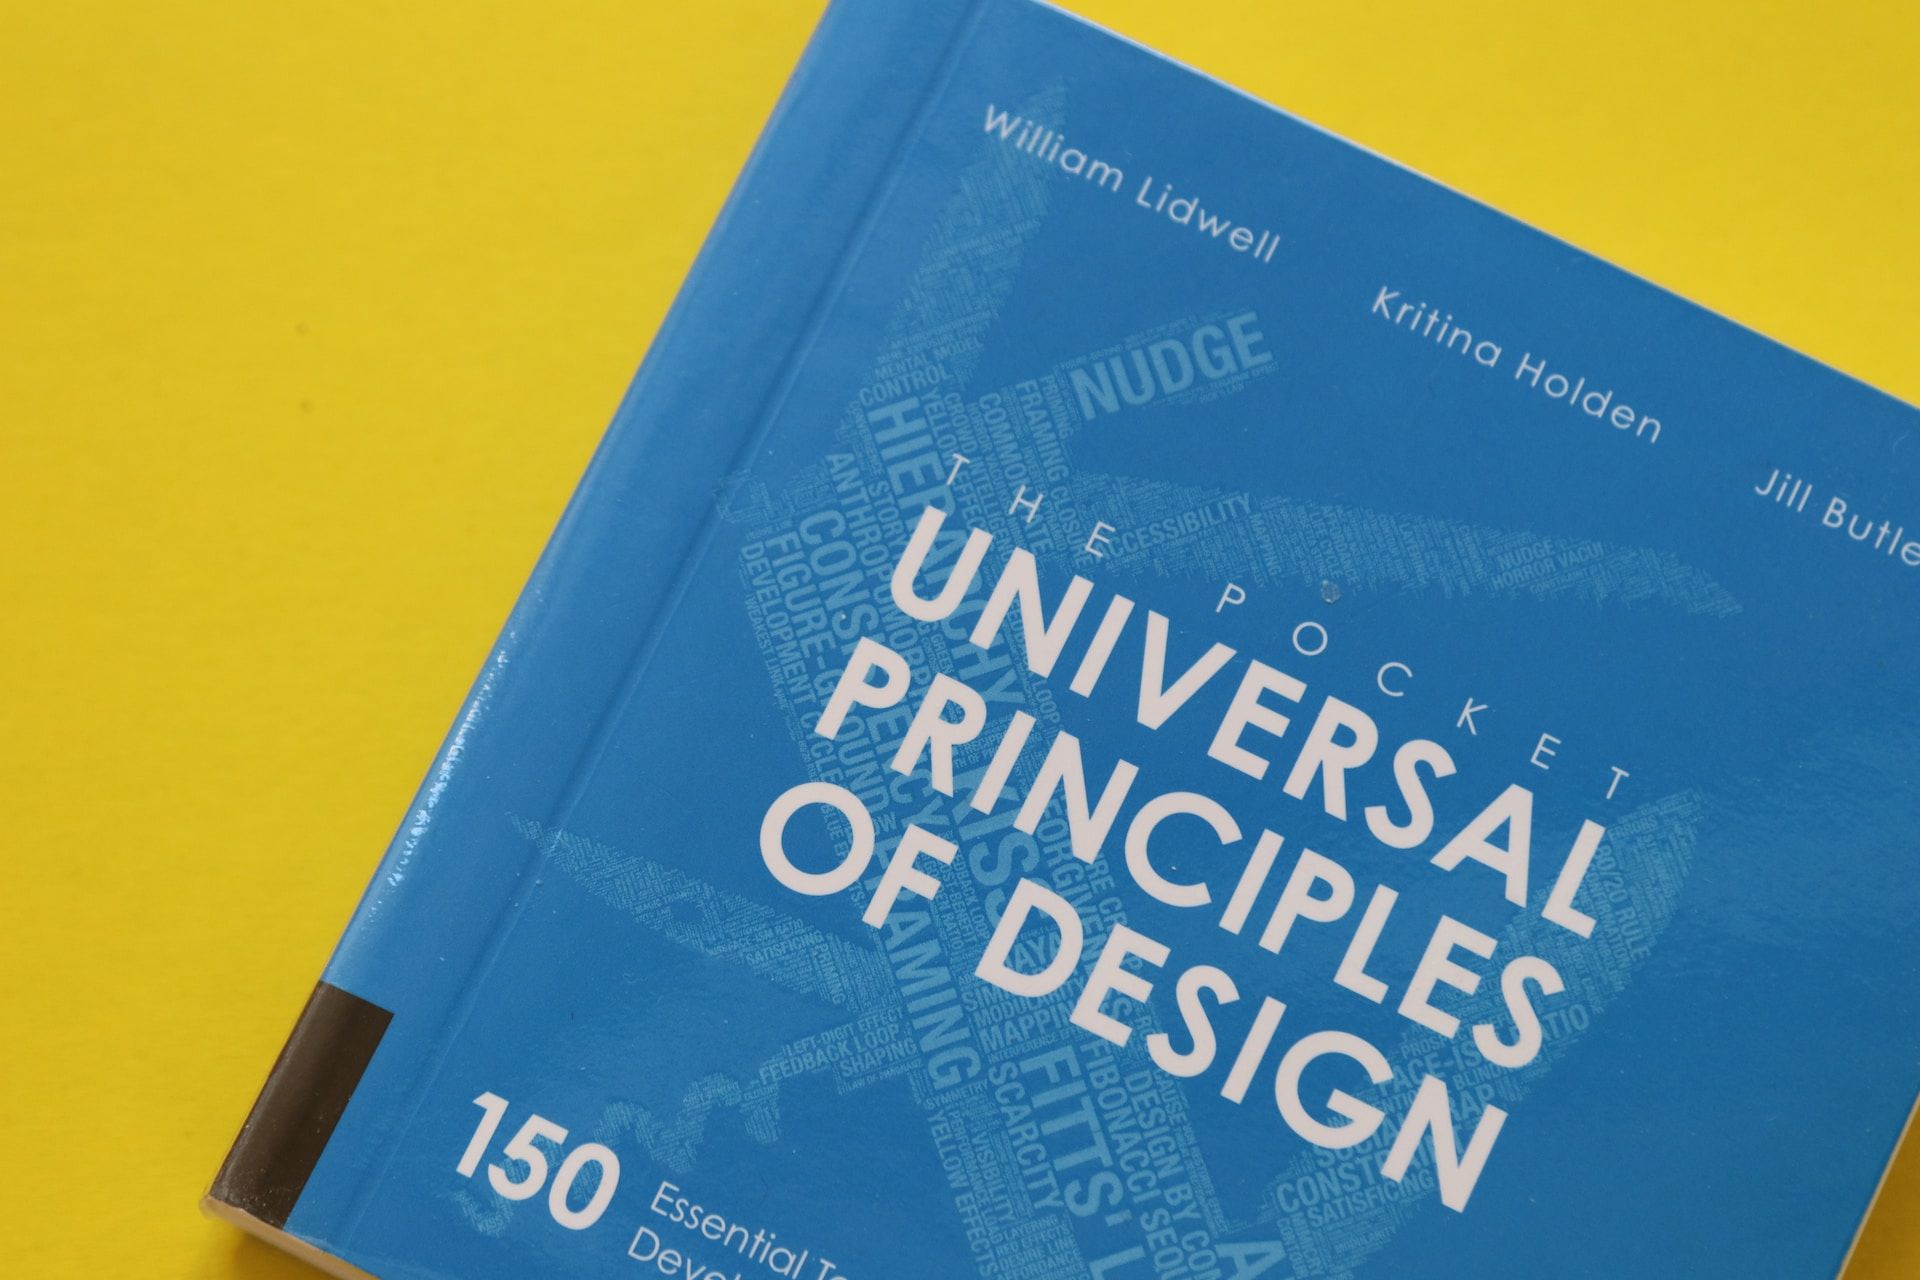 A blue design book on a yellow background